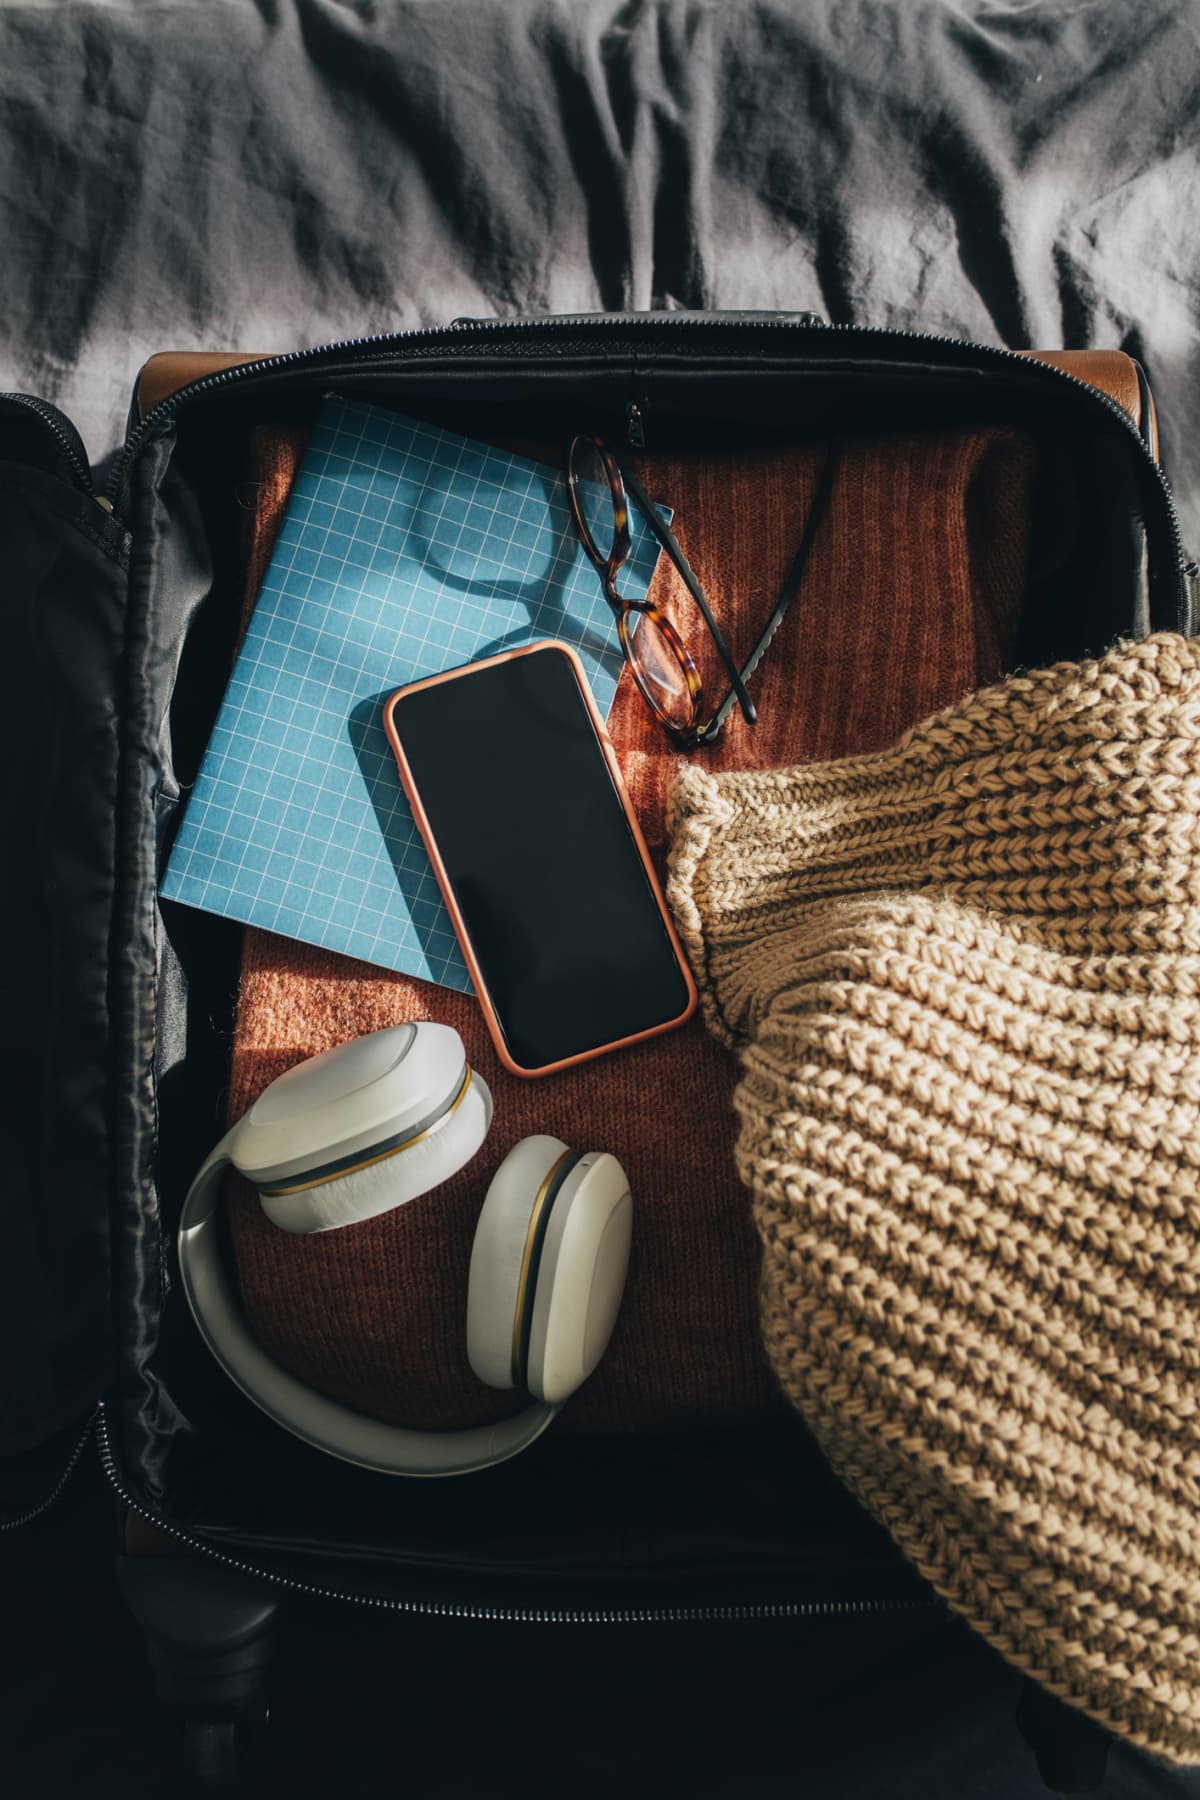 Woman's suitcase laid on a bed with a lot of travel-related objects all around: a mobile phone, clothes, accessories.